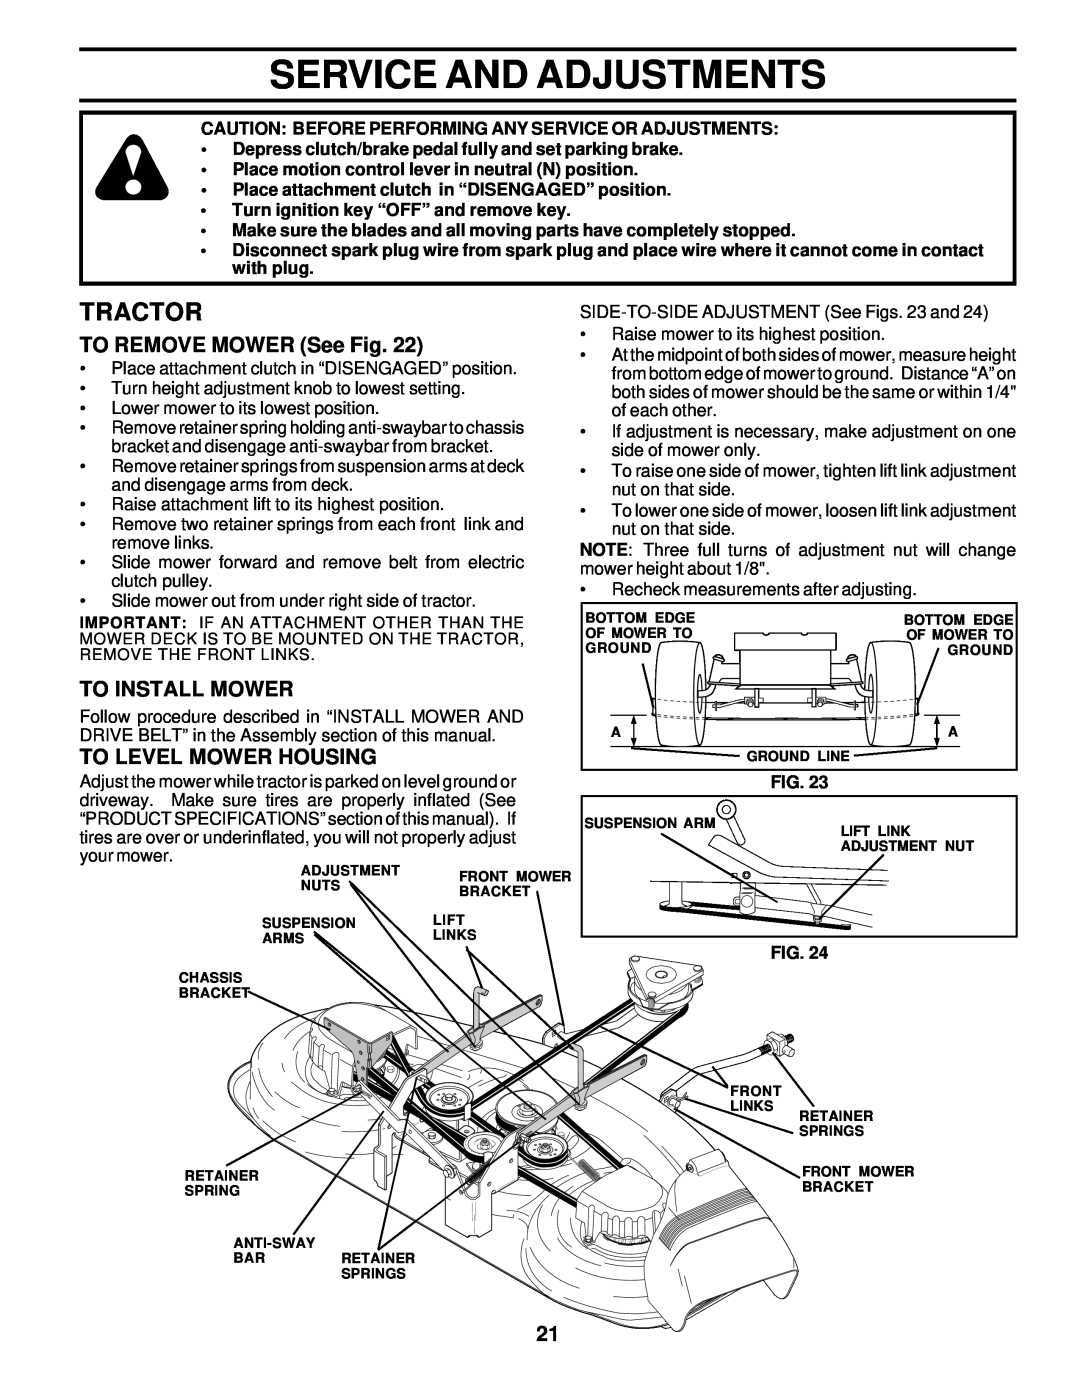 Poulan 178249 Service And Adjustments, TO REMOVE MOWER See Fig, To Install Mower, To Level Mower Housing, Tractor 